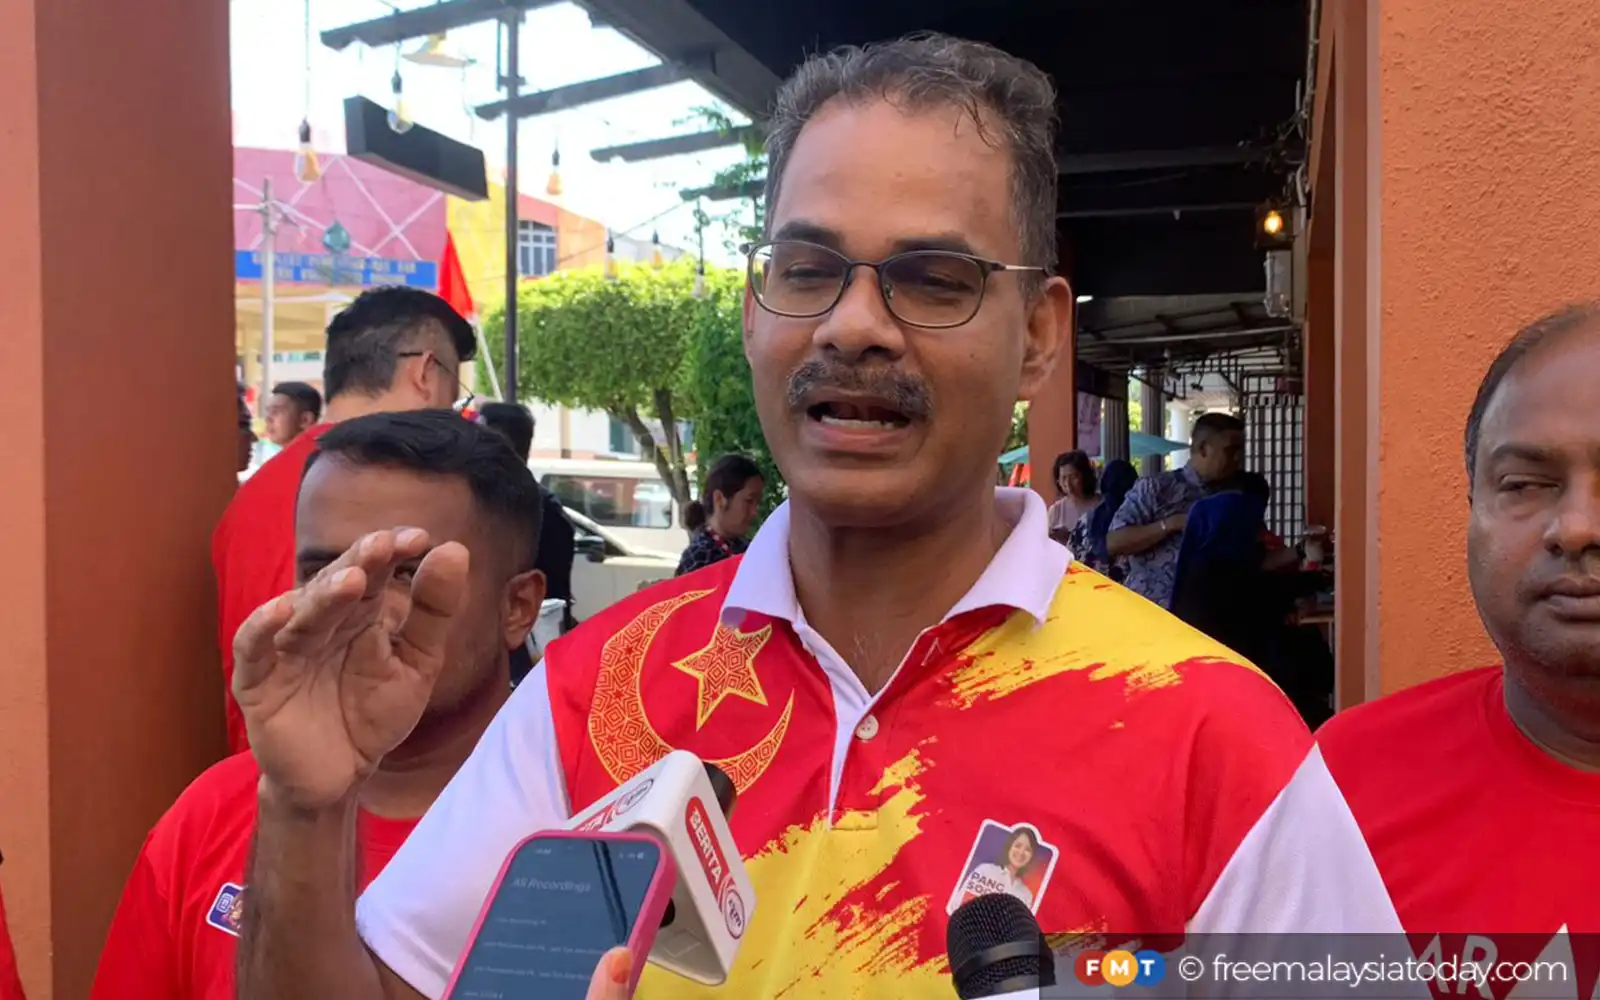 issues affecting indians in kkb resolved, says selangor exco